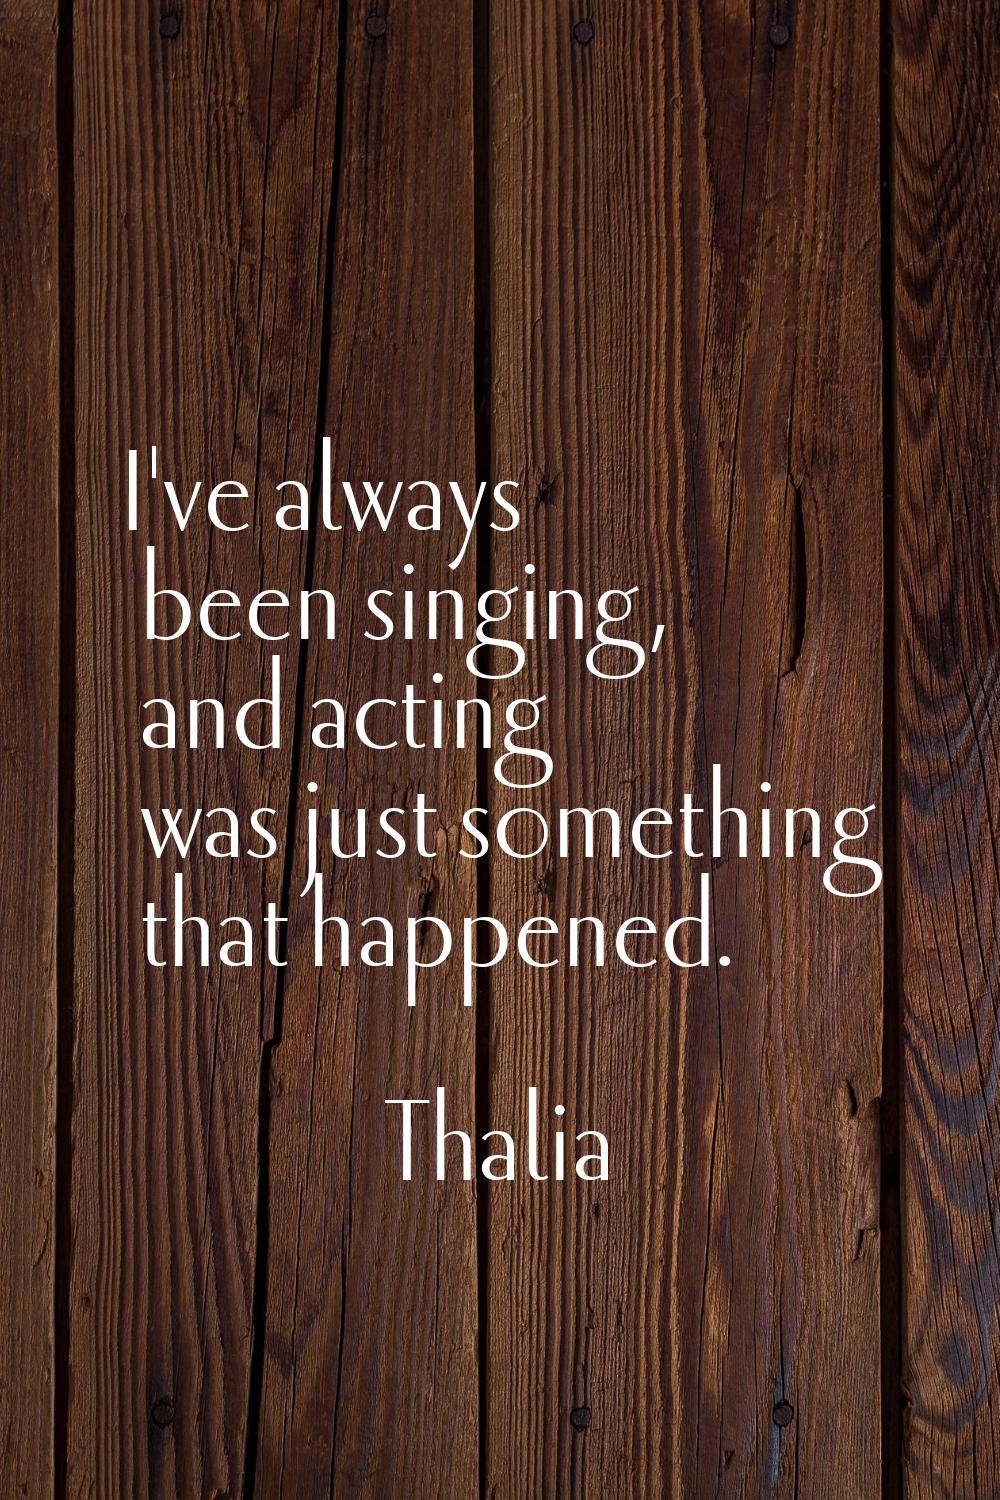 I've always been singing, and acting was just something that happened.